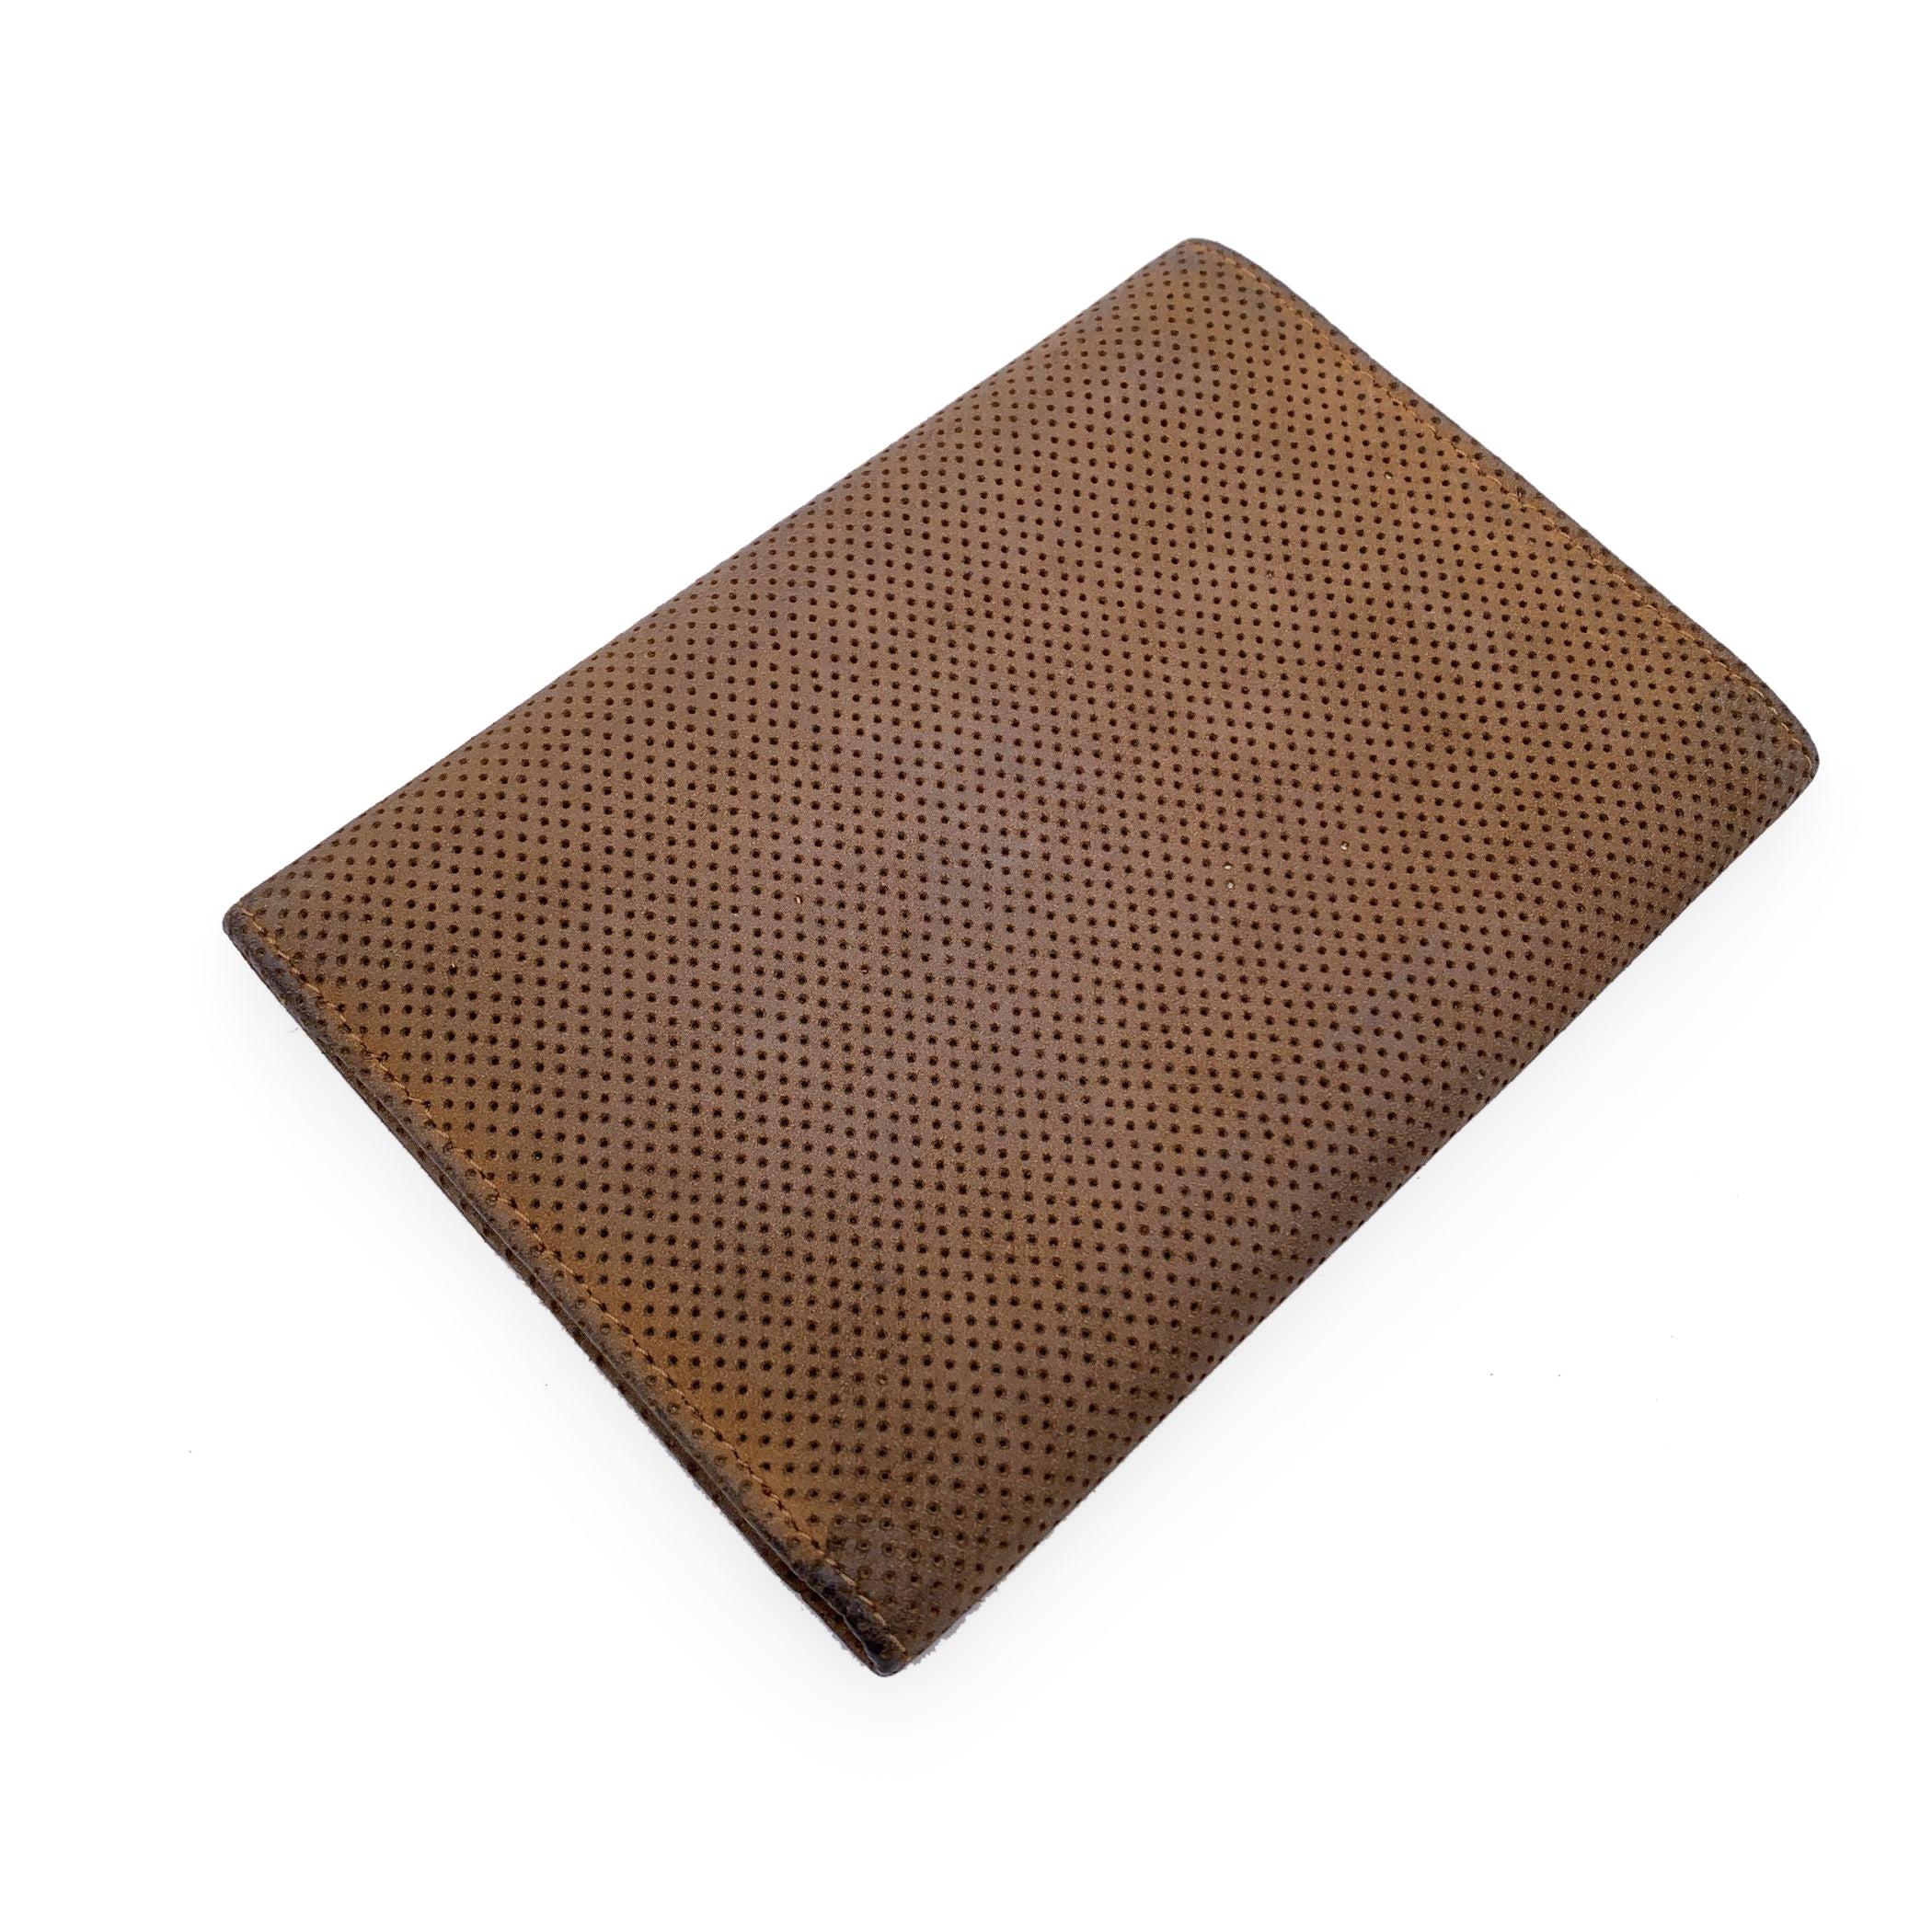 Fendissime Fendi Vintage Beige Perforated Leather Wallet In Fair Condition For Sale In Rome, Rome